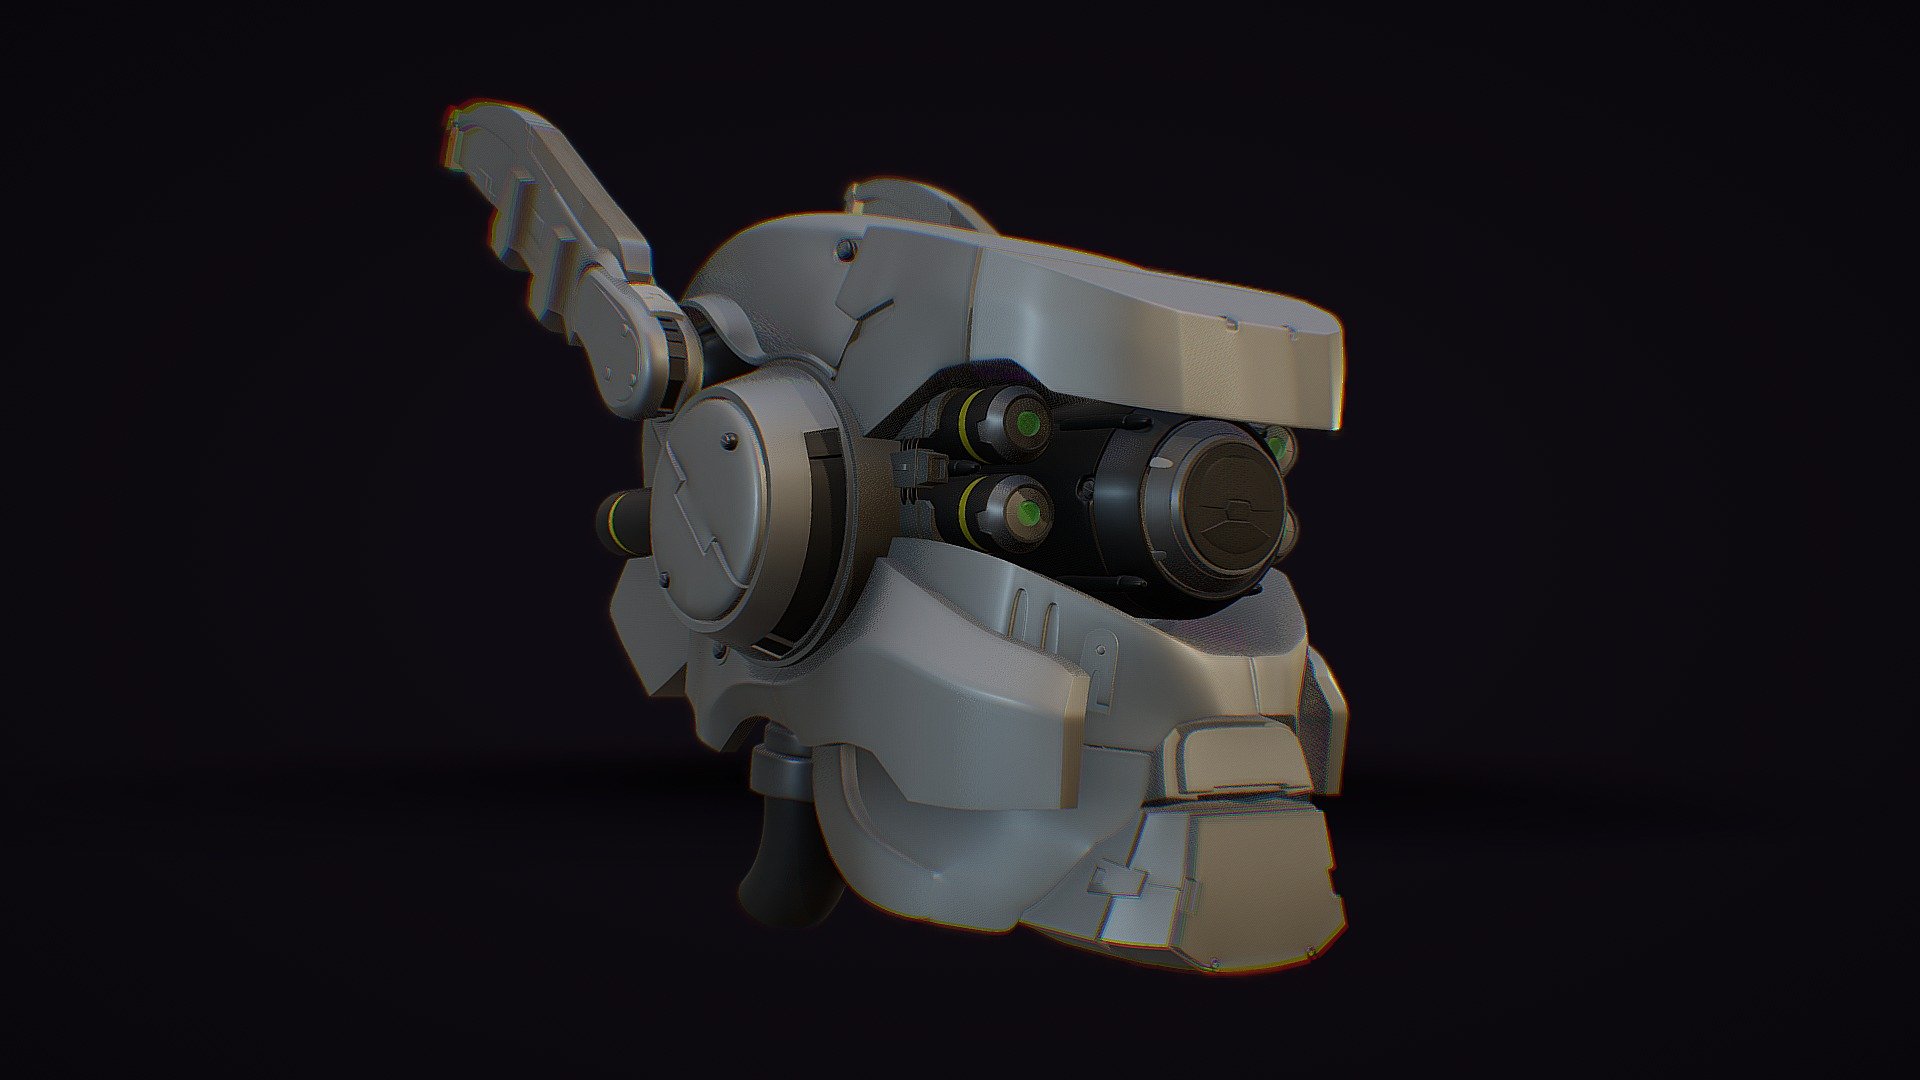 5th homework assignment for my modeling classes (Hard surface, robot or android modeling and rendering)

Piece choosen: Briareos Head from Appleseed Alpha

Latest Render:


**ArtStation Post ** - Briareos (Appleseed Alpha) - 3D model by A ∆ R 0 N (@valartys) 3d model